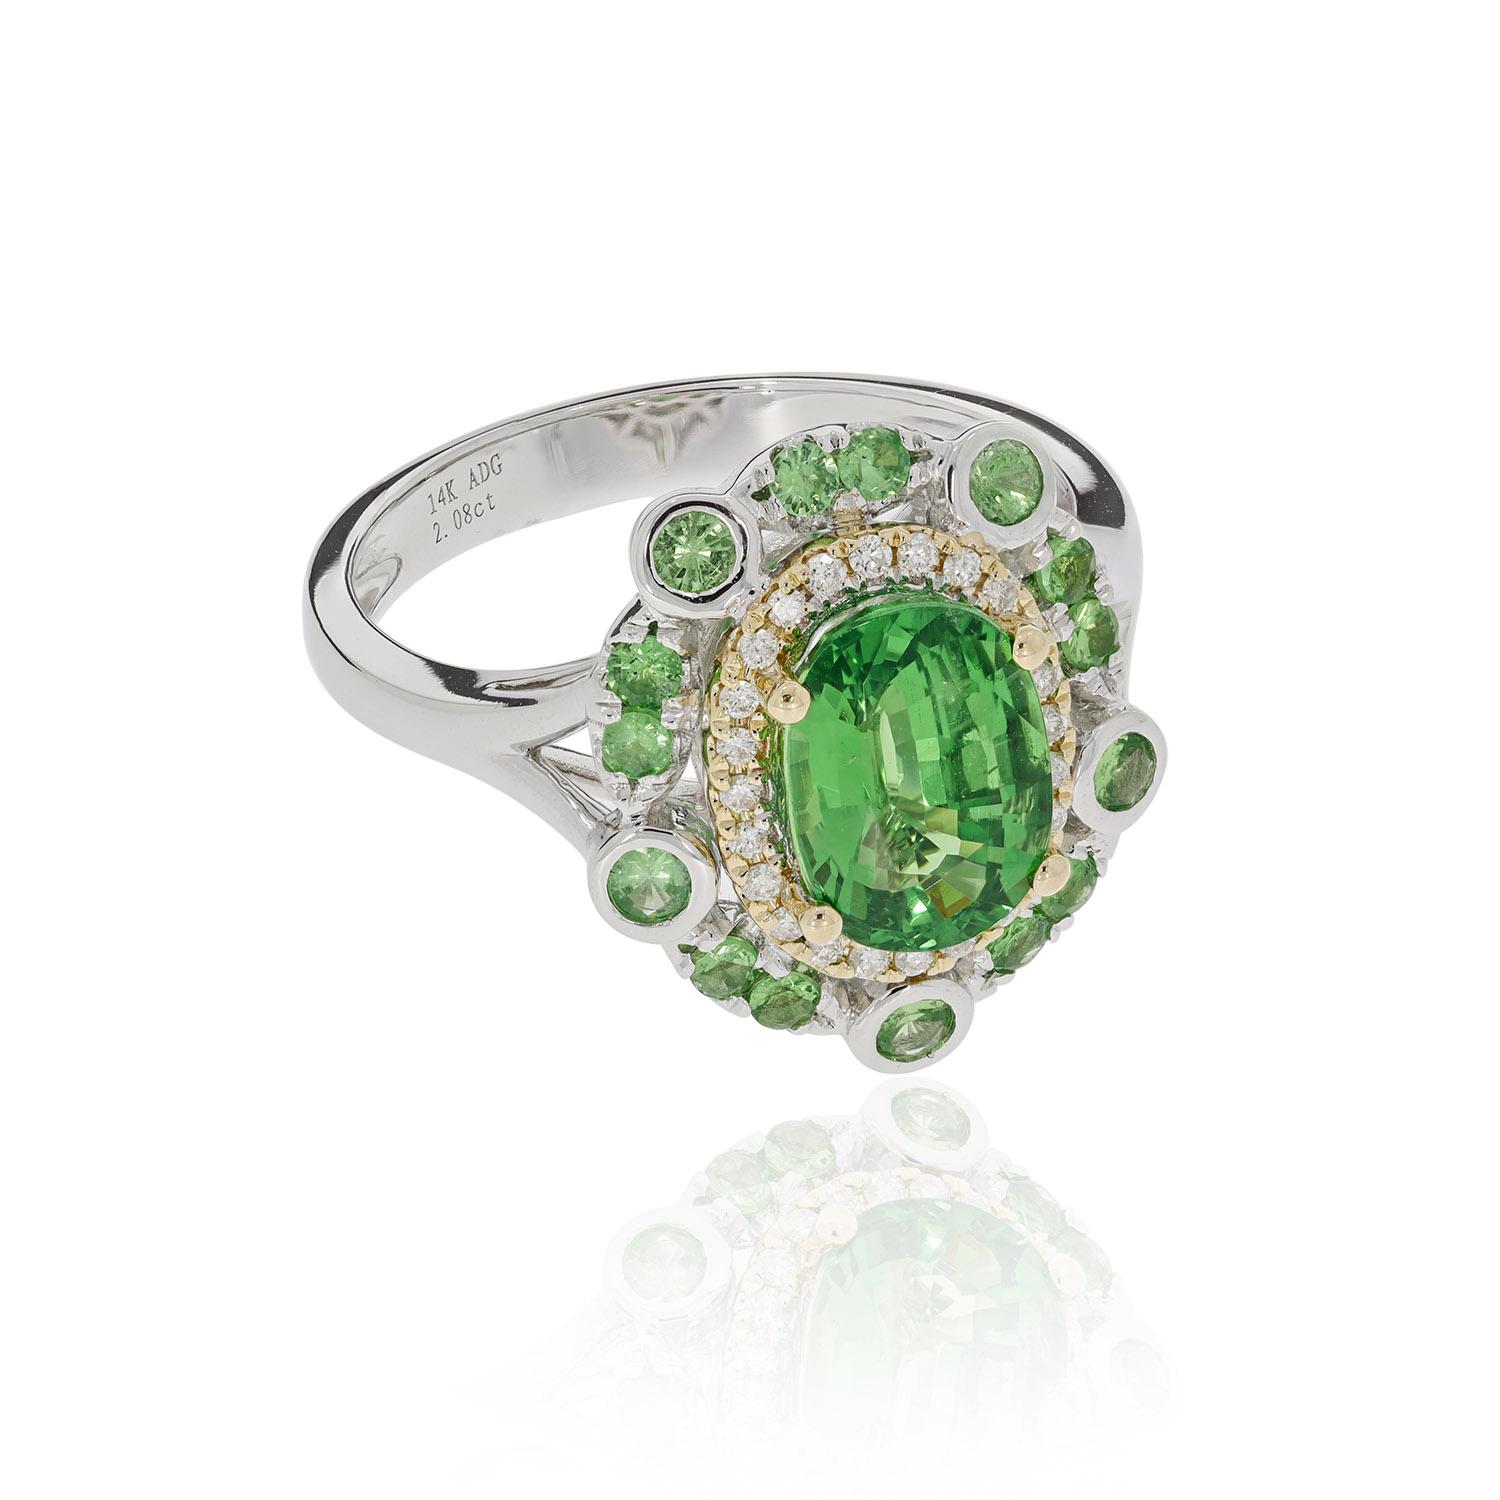 A beautiful combination of classic and modern skills, this magnificent ring adds drama to your look with its breath-taking finish. The Tsavorite spreads its lush green shade with flair in its Diana style design. Crafted in 14K two-tone gold, this